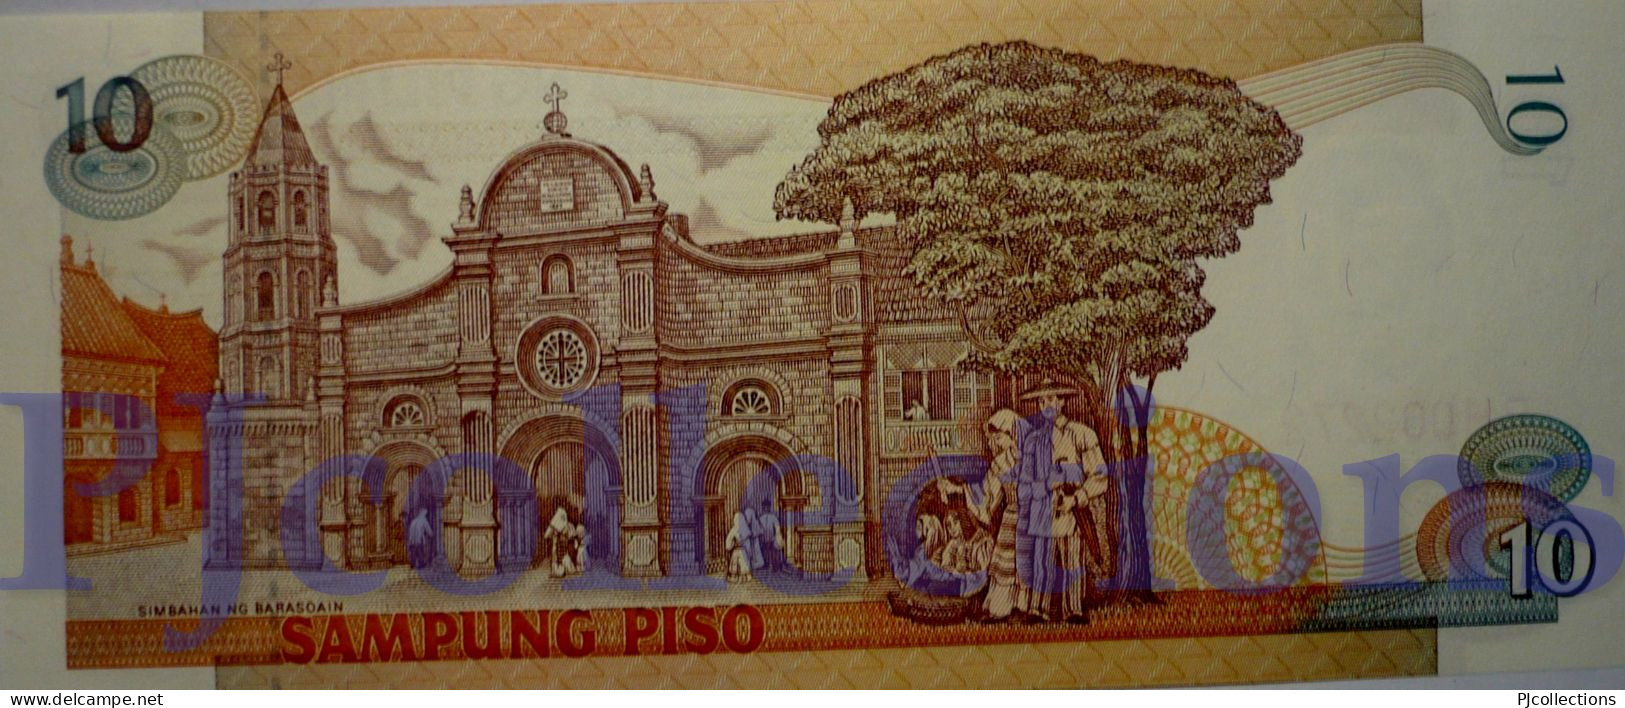 PHILIPPINES 10 PISO 1995/97 PICK 181a UNC LOW SERIAL NUMBER "RH002272 - Filipinas